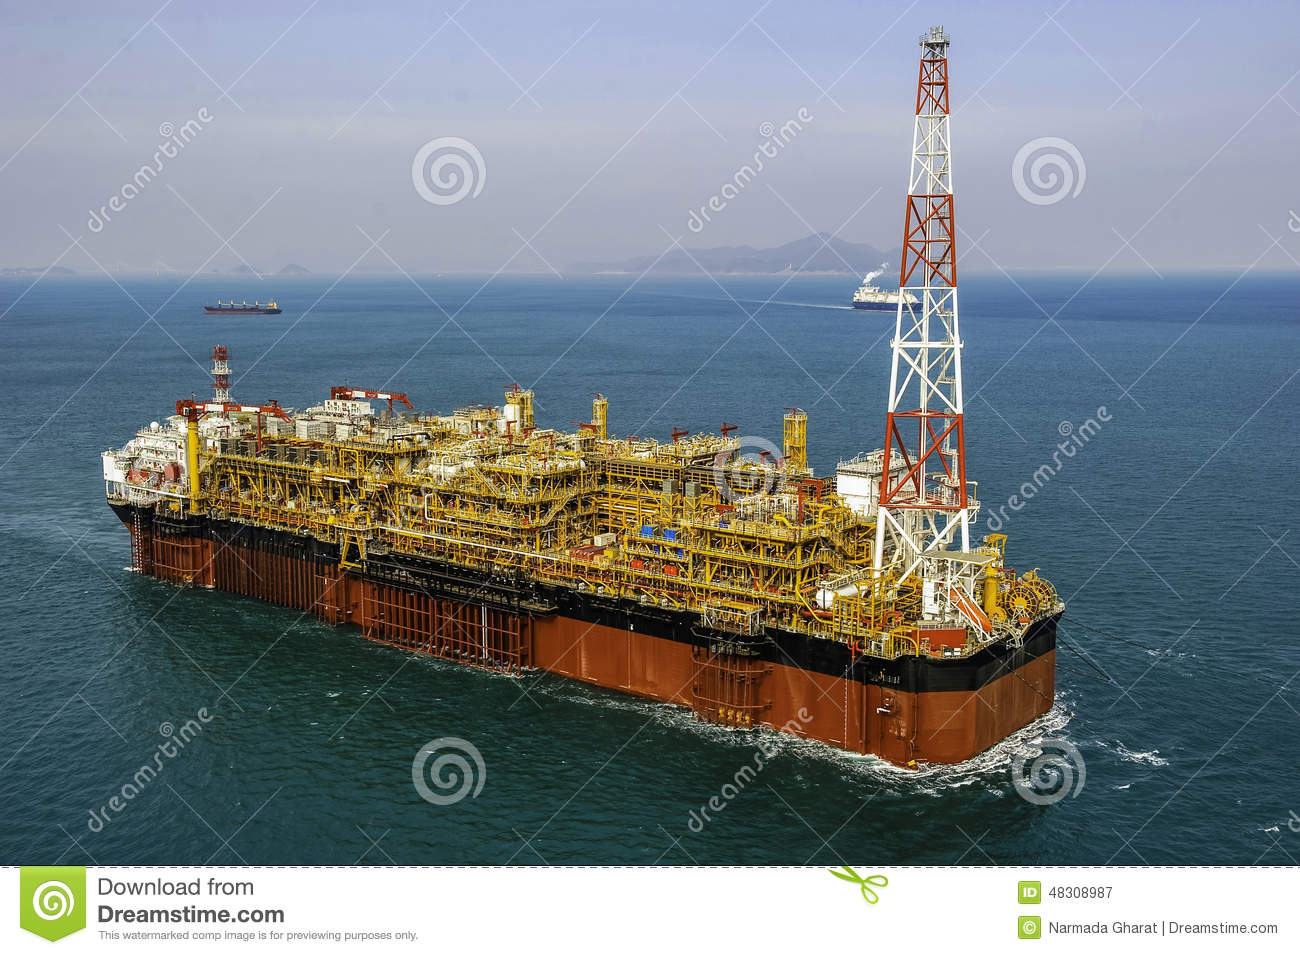     Vessel Used To Explore The Crude Oil   Gas Under The Seabed